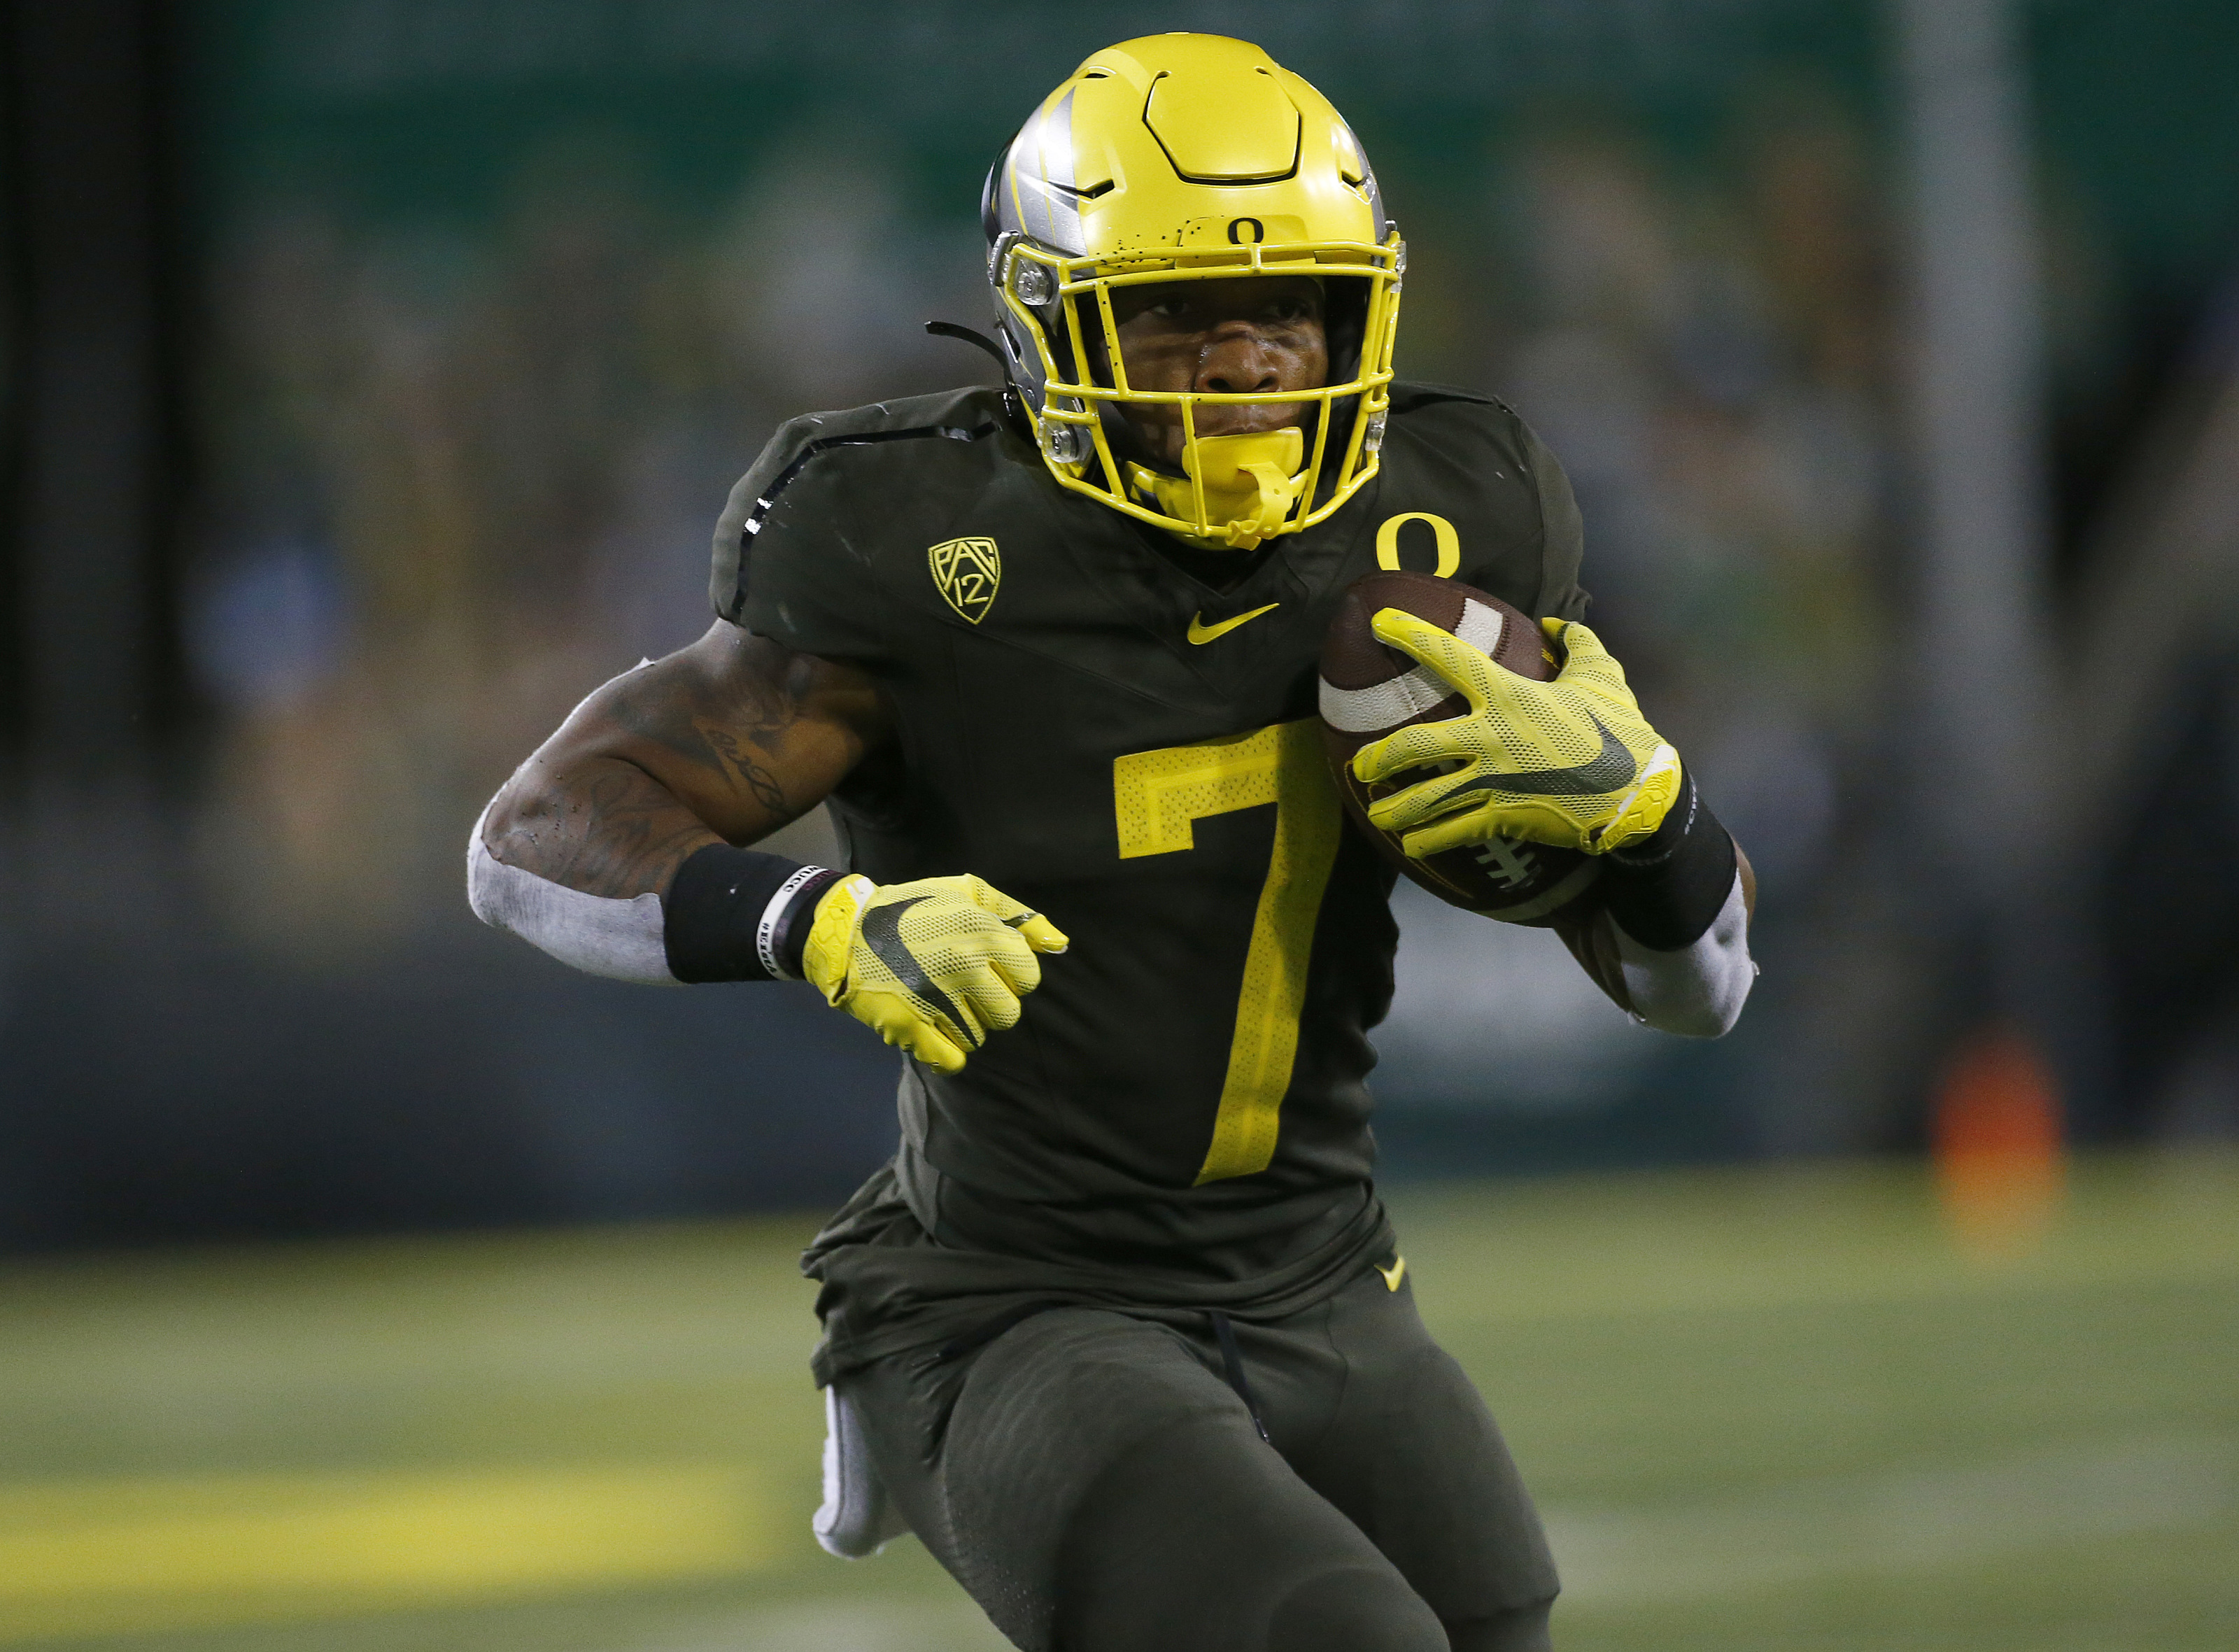 Oregon Football: Top 8 early prospects for 2022 NFL Draft